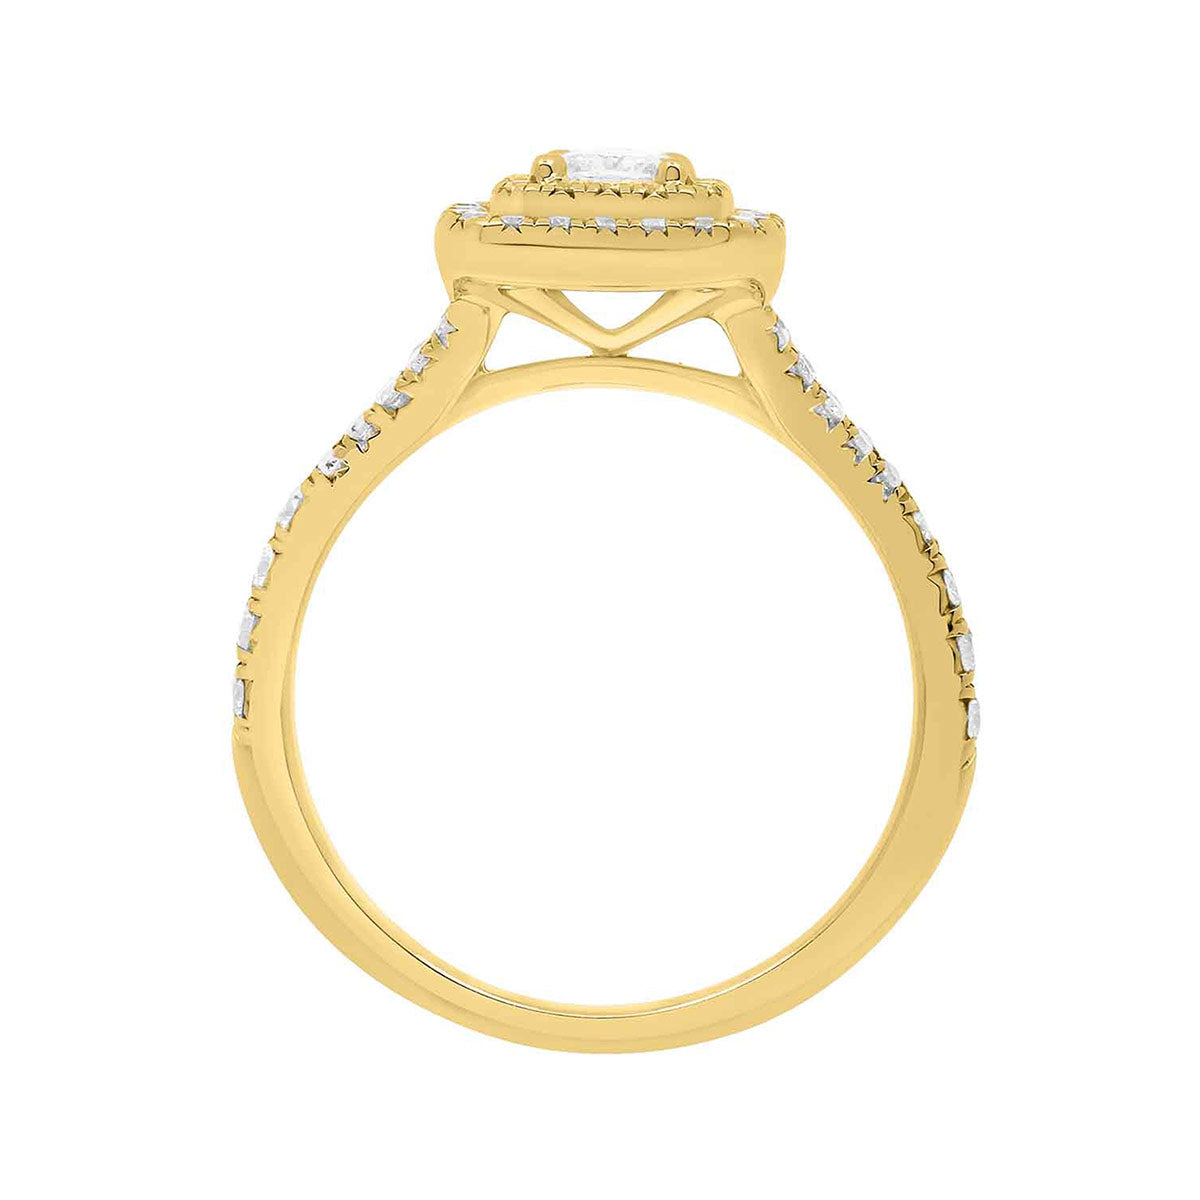 Double Halo Cushion Cut Diamond Ring in yellow gold in an upstanding position